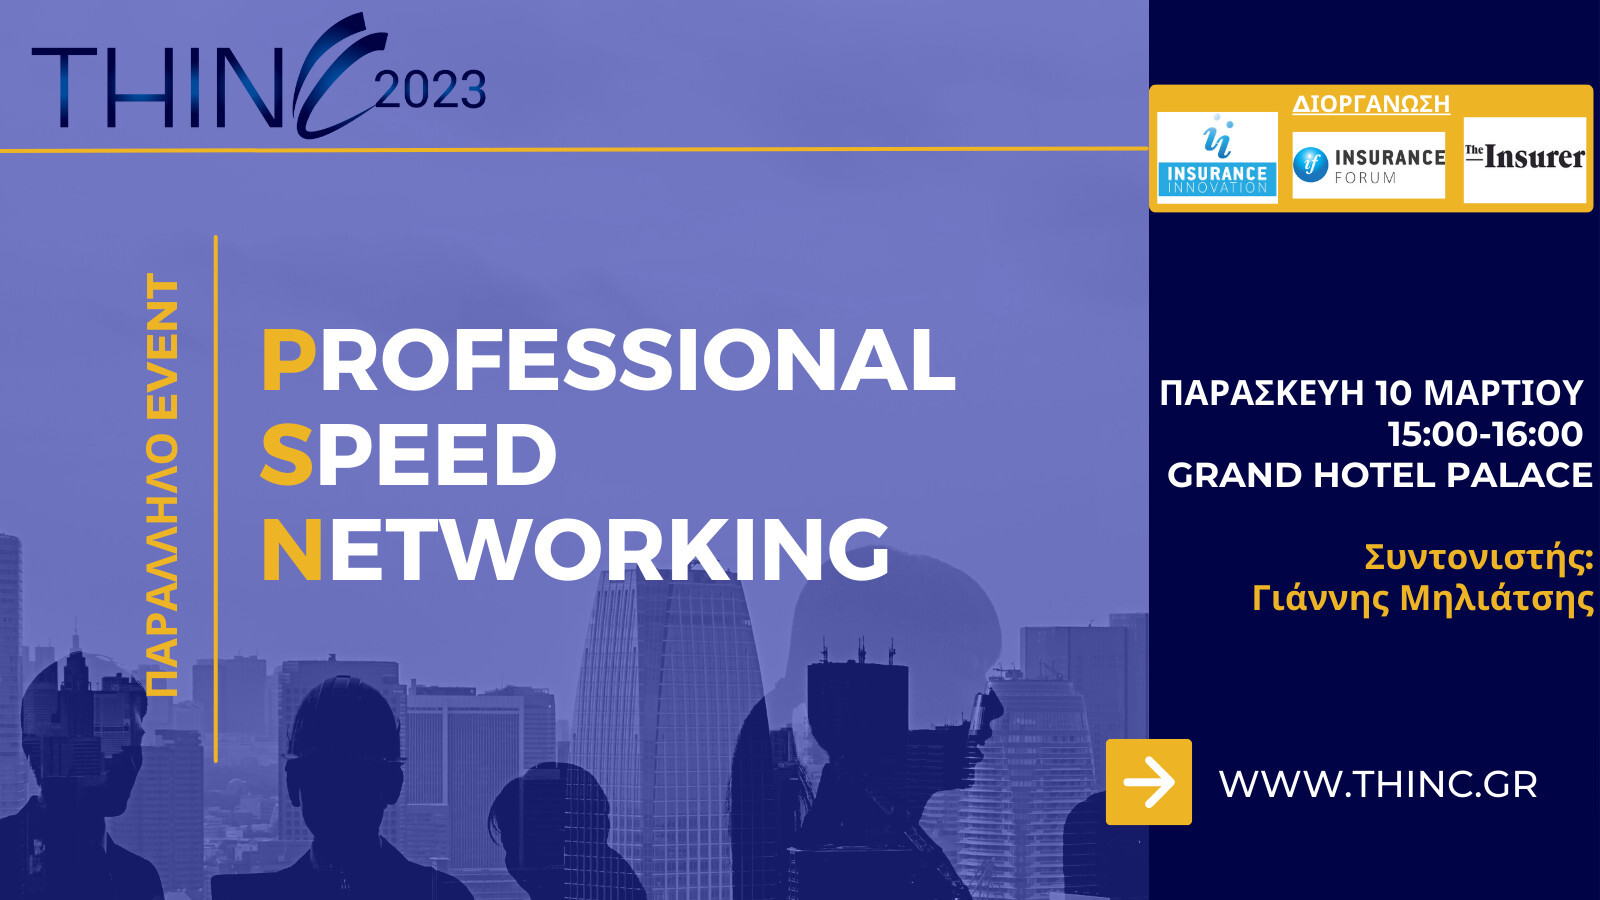 professional-speed-networking.jpg?mtime=20230309123513#asset:402738